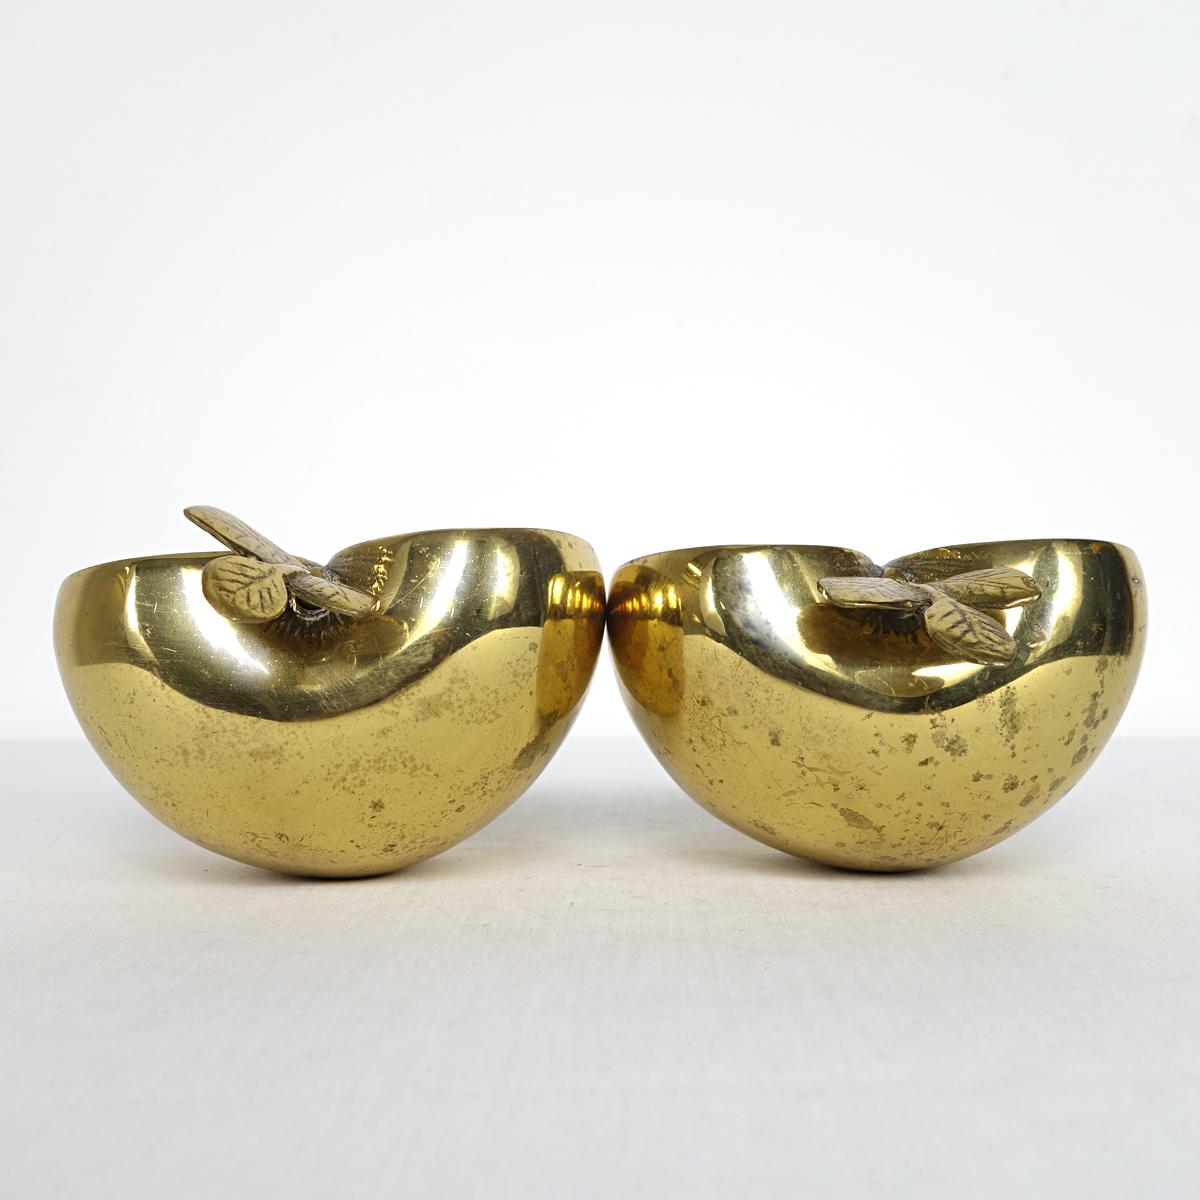 Attractive set of two shiny brass apple parts that make perfect bookends due to their impressive weight as they are filled with sand. Marked 